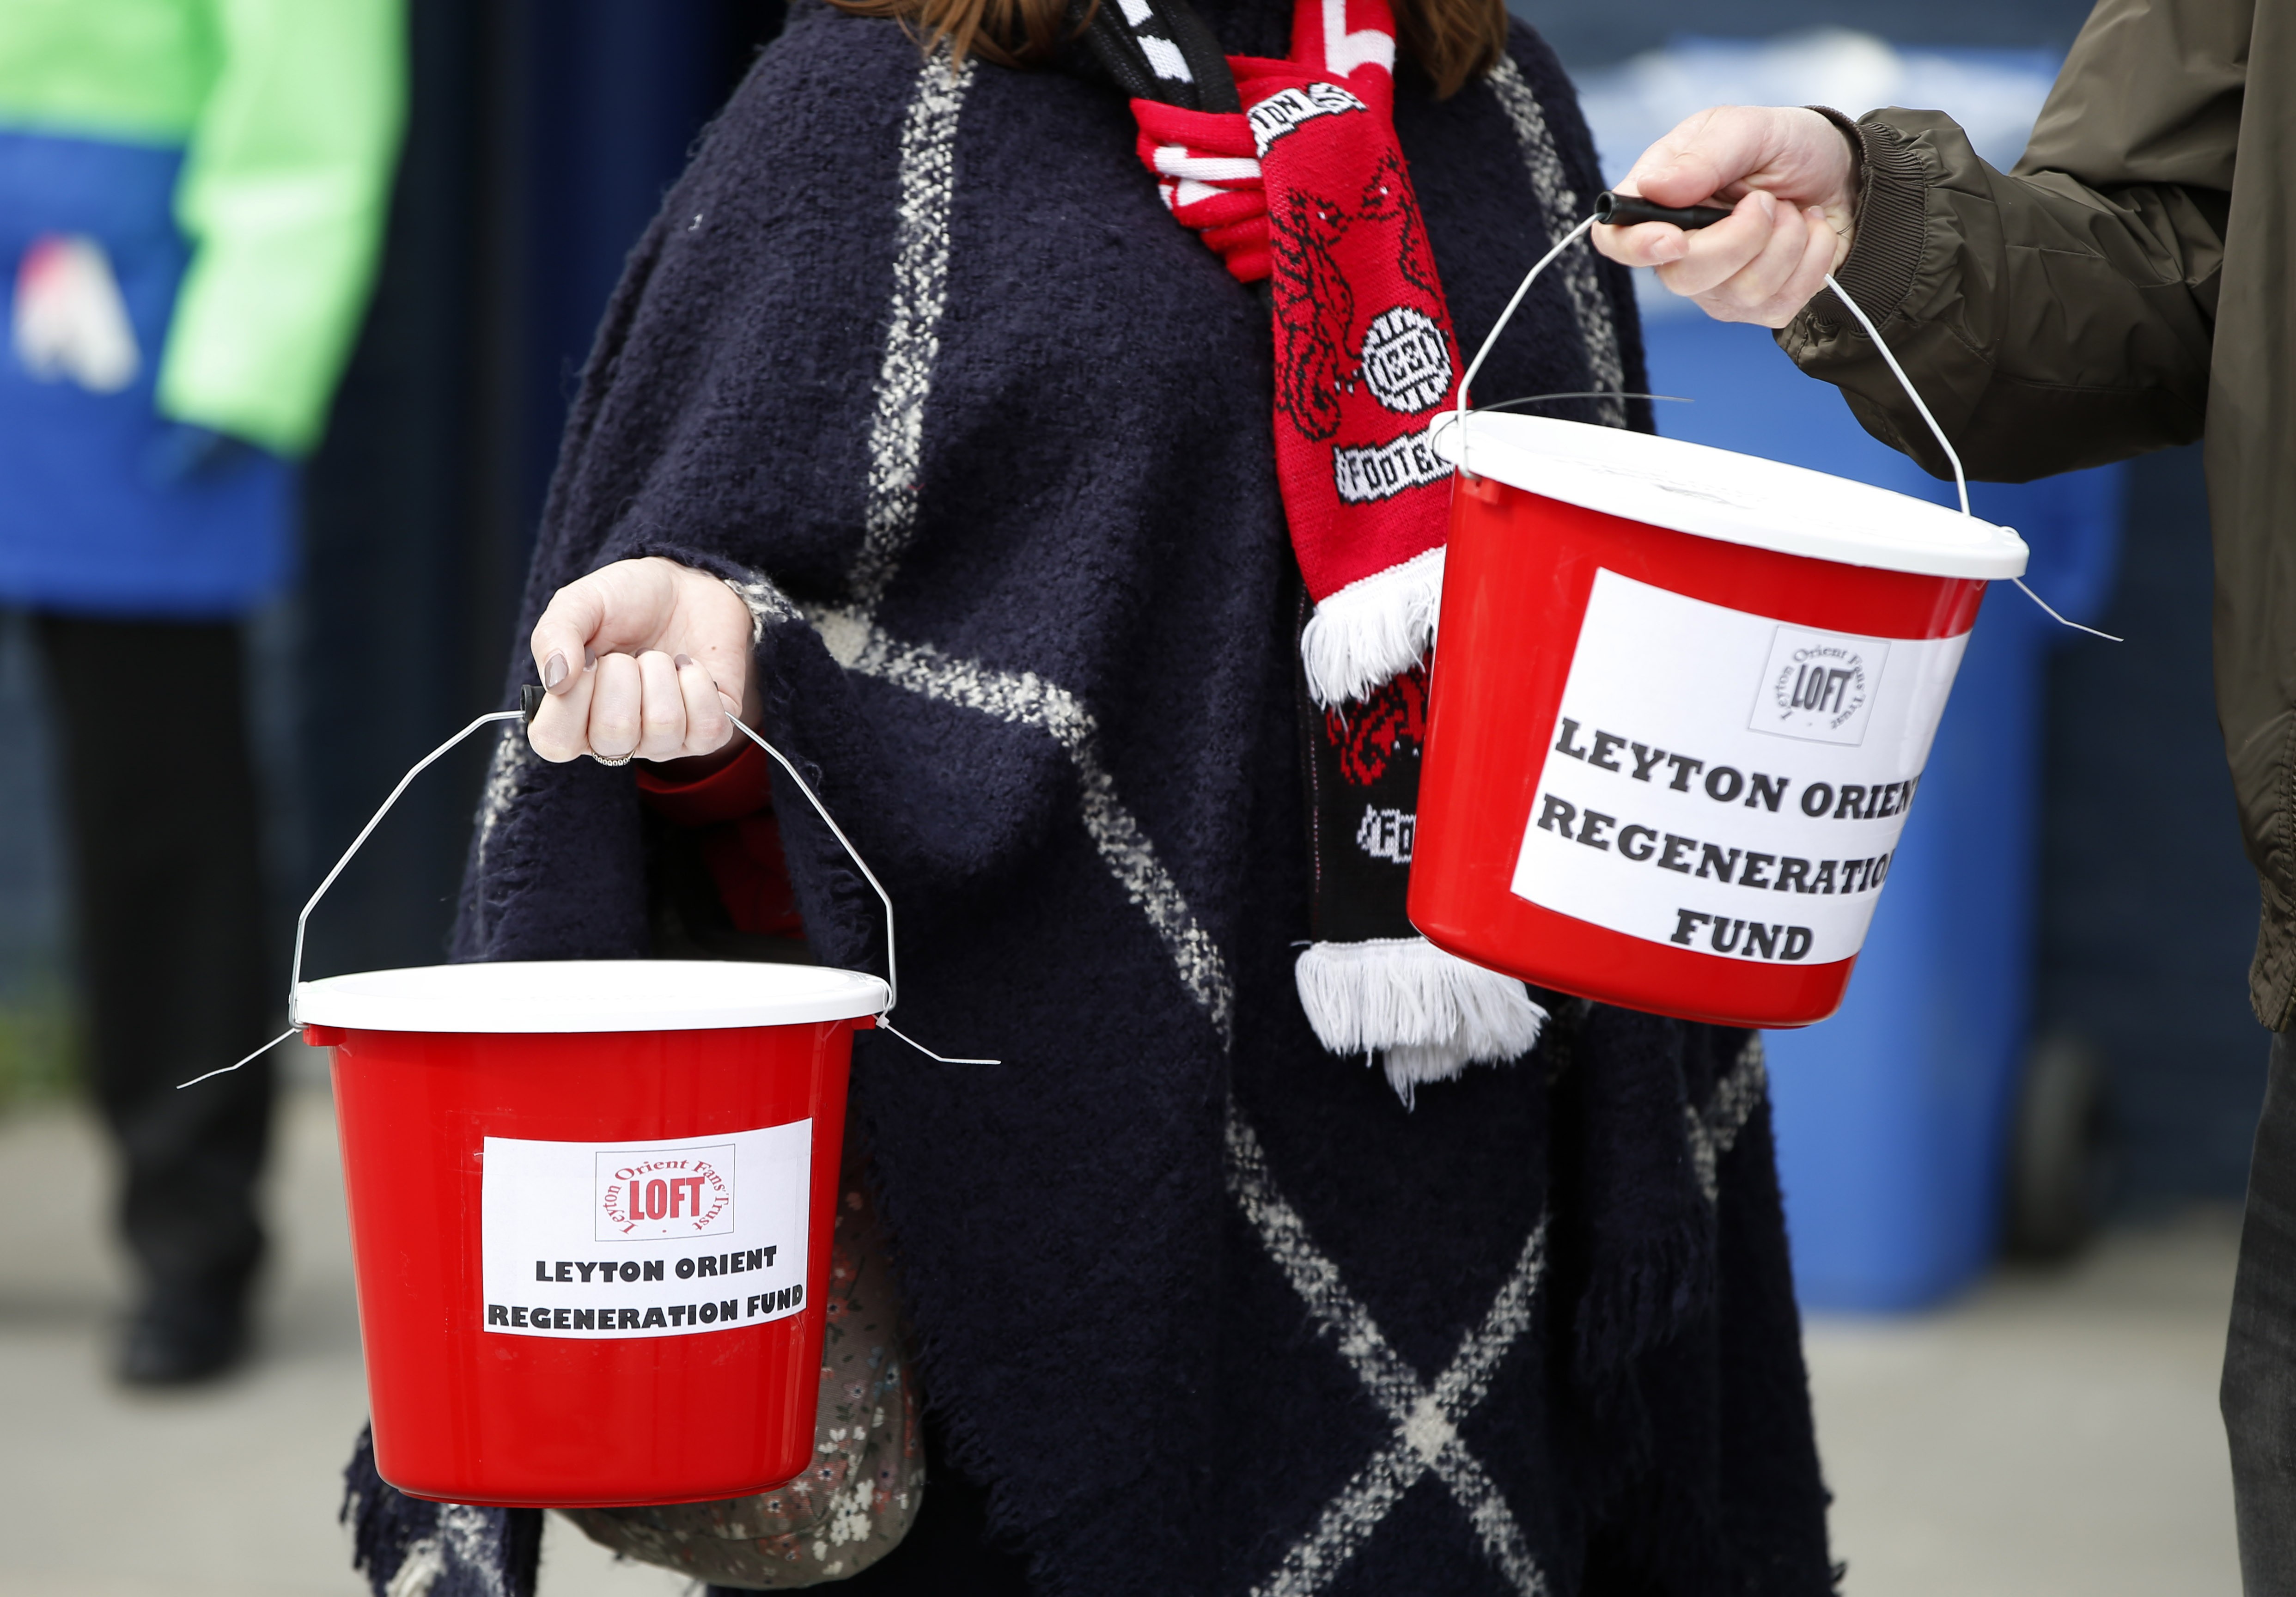 Leyton Orient fans collect money outside the ground. Photo: Reuters